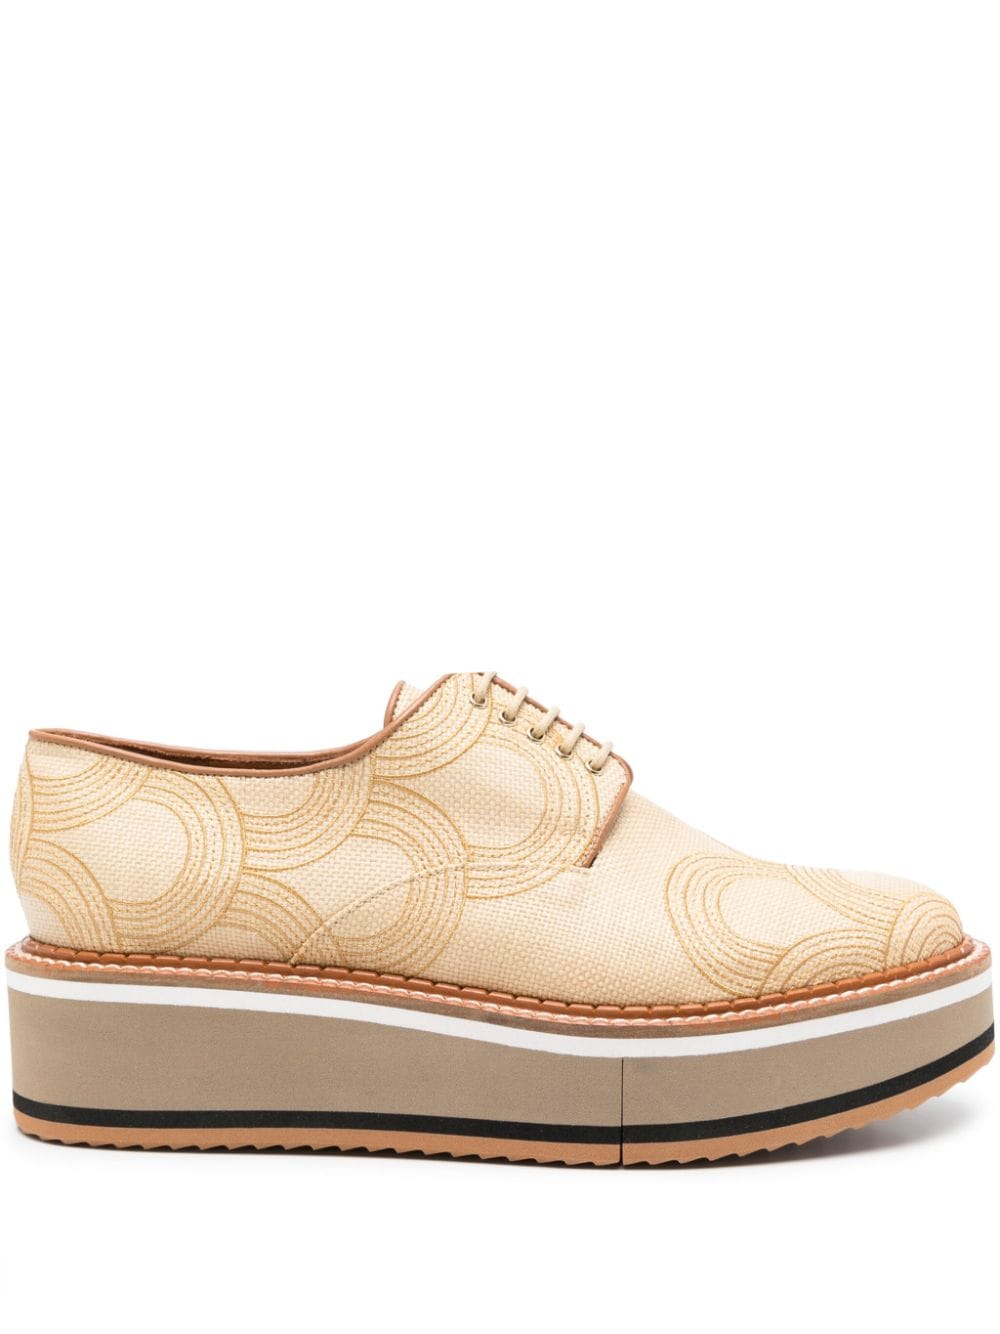 Clergerie Baxter 45mm Oxford Shoes In Neutrals